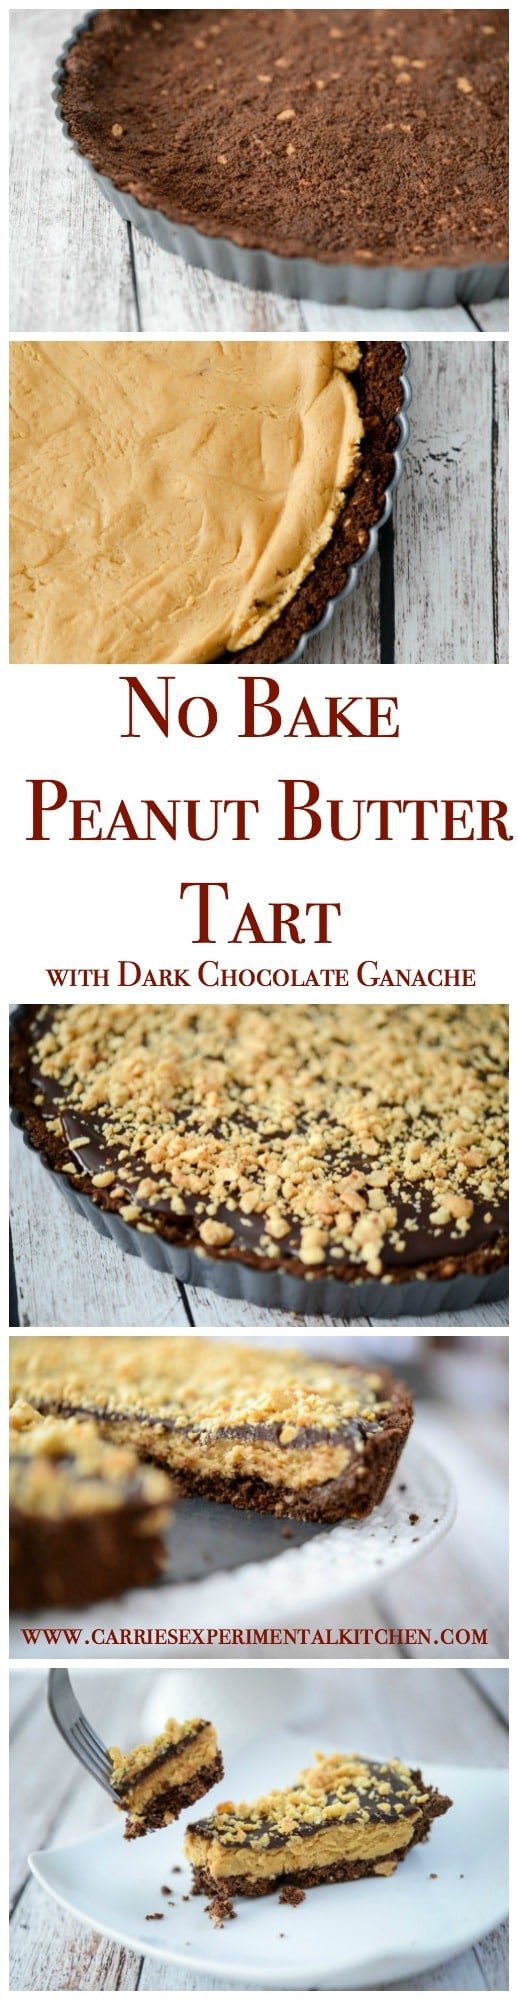 This No Bake Peanut Butter Tart with Dark Chocolate Ganache is so rich and decadent it's perfect for holidays or special occasions. 